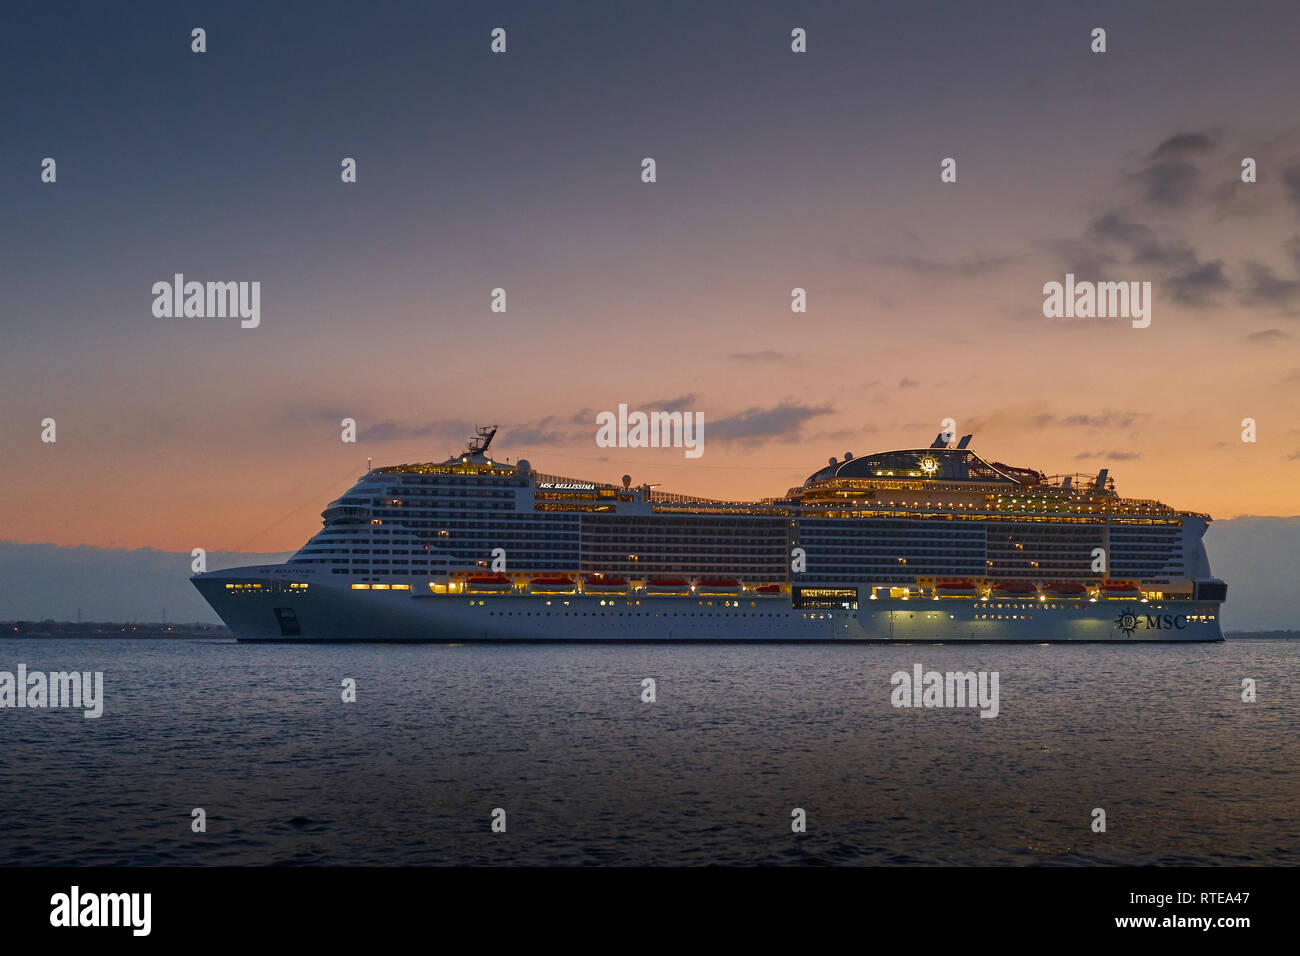 Sunrise Over The MSC Cruises New Flag Ship, MSC BELLISSIMA, On Her Maiden Voyage From St. Nazaire, France To Southampton, UK. 1st March, 2019. Credit: Jon Lord/Alamy. Stock Photo